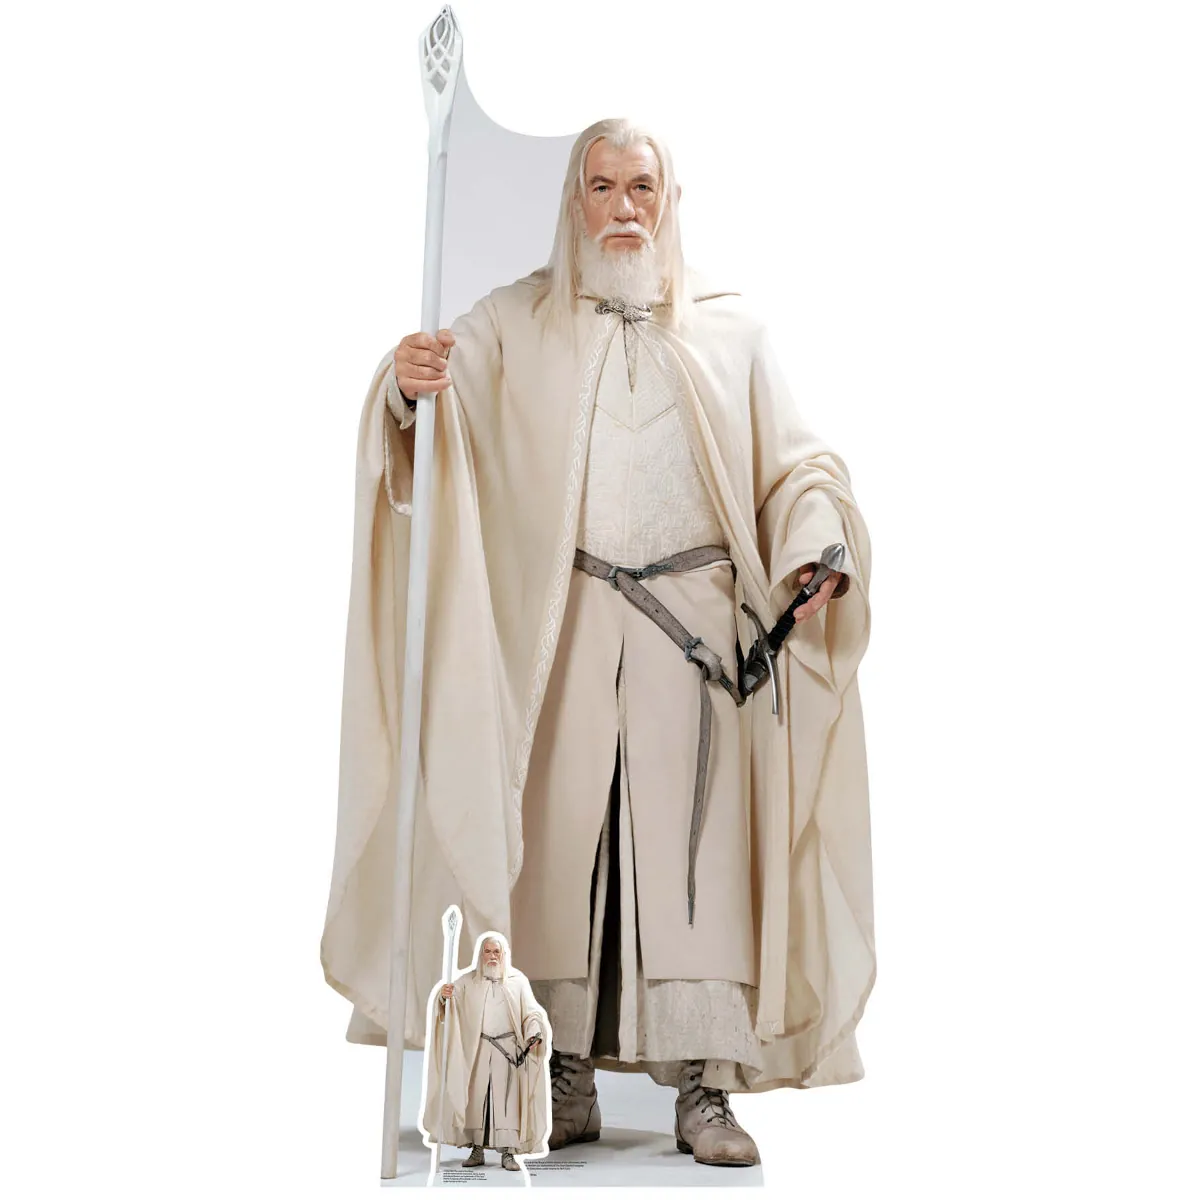 SC4132 Gandalf (The Lord of the Rings) Official Lifesize + Mini Cardboard Cutout Standee Front